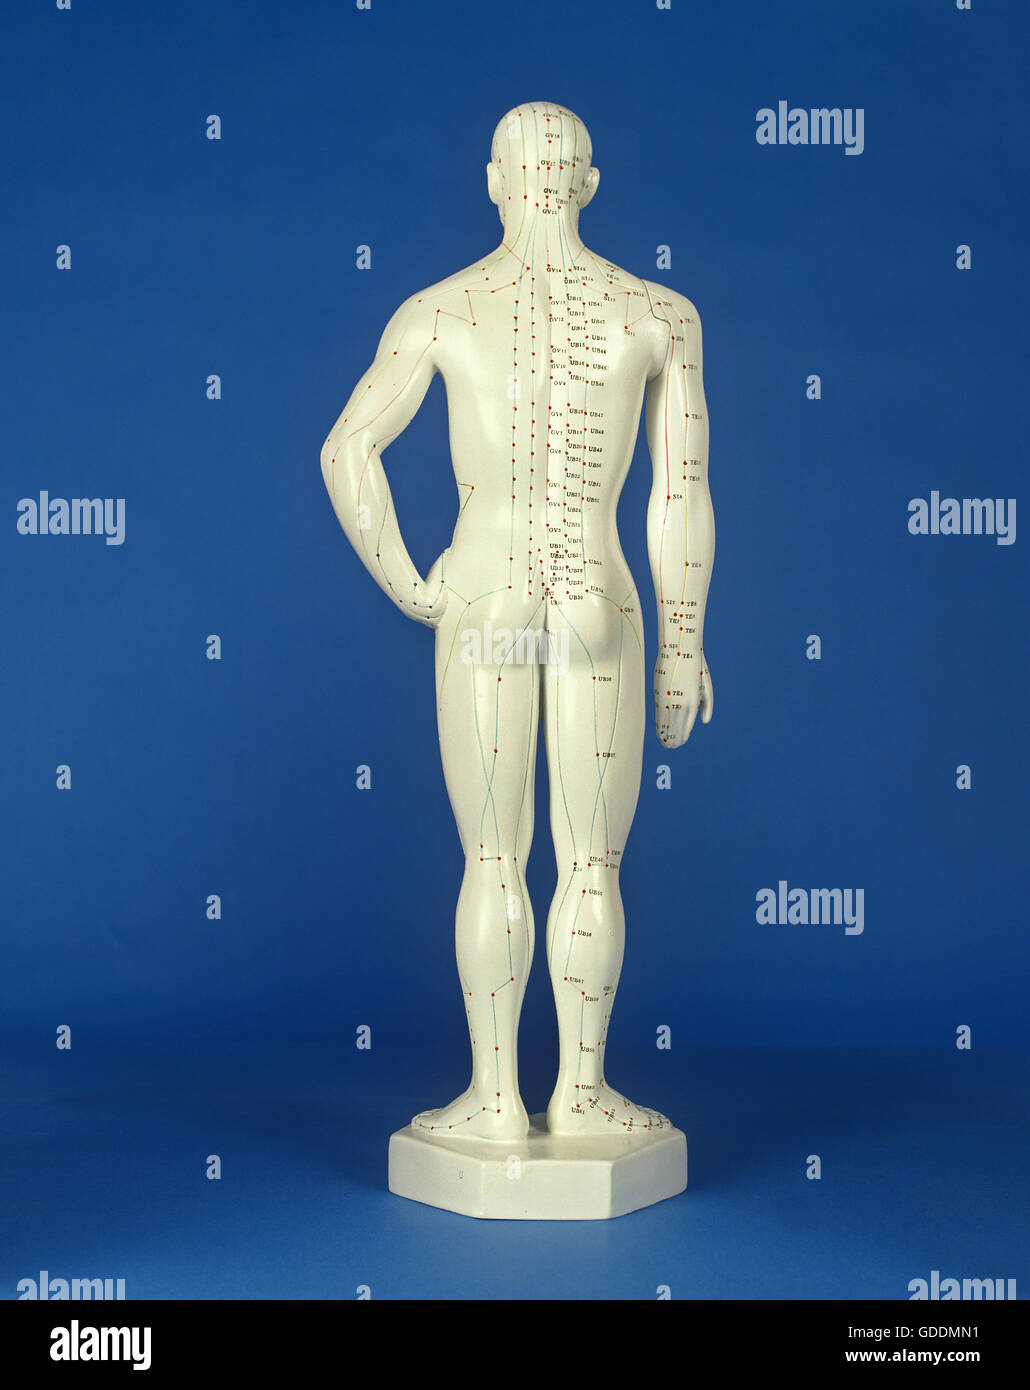 Man Statuette showing Acupuncture Points Stock Photo